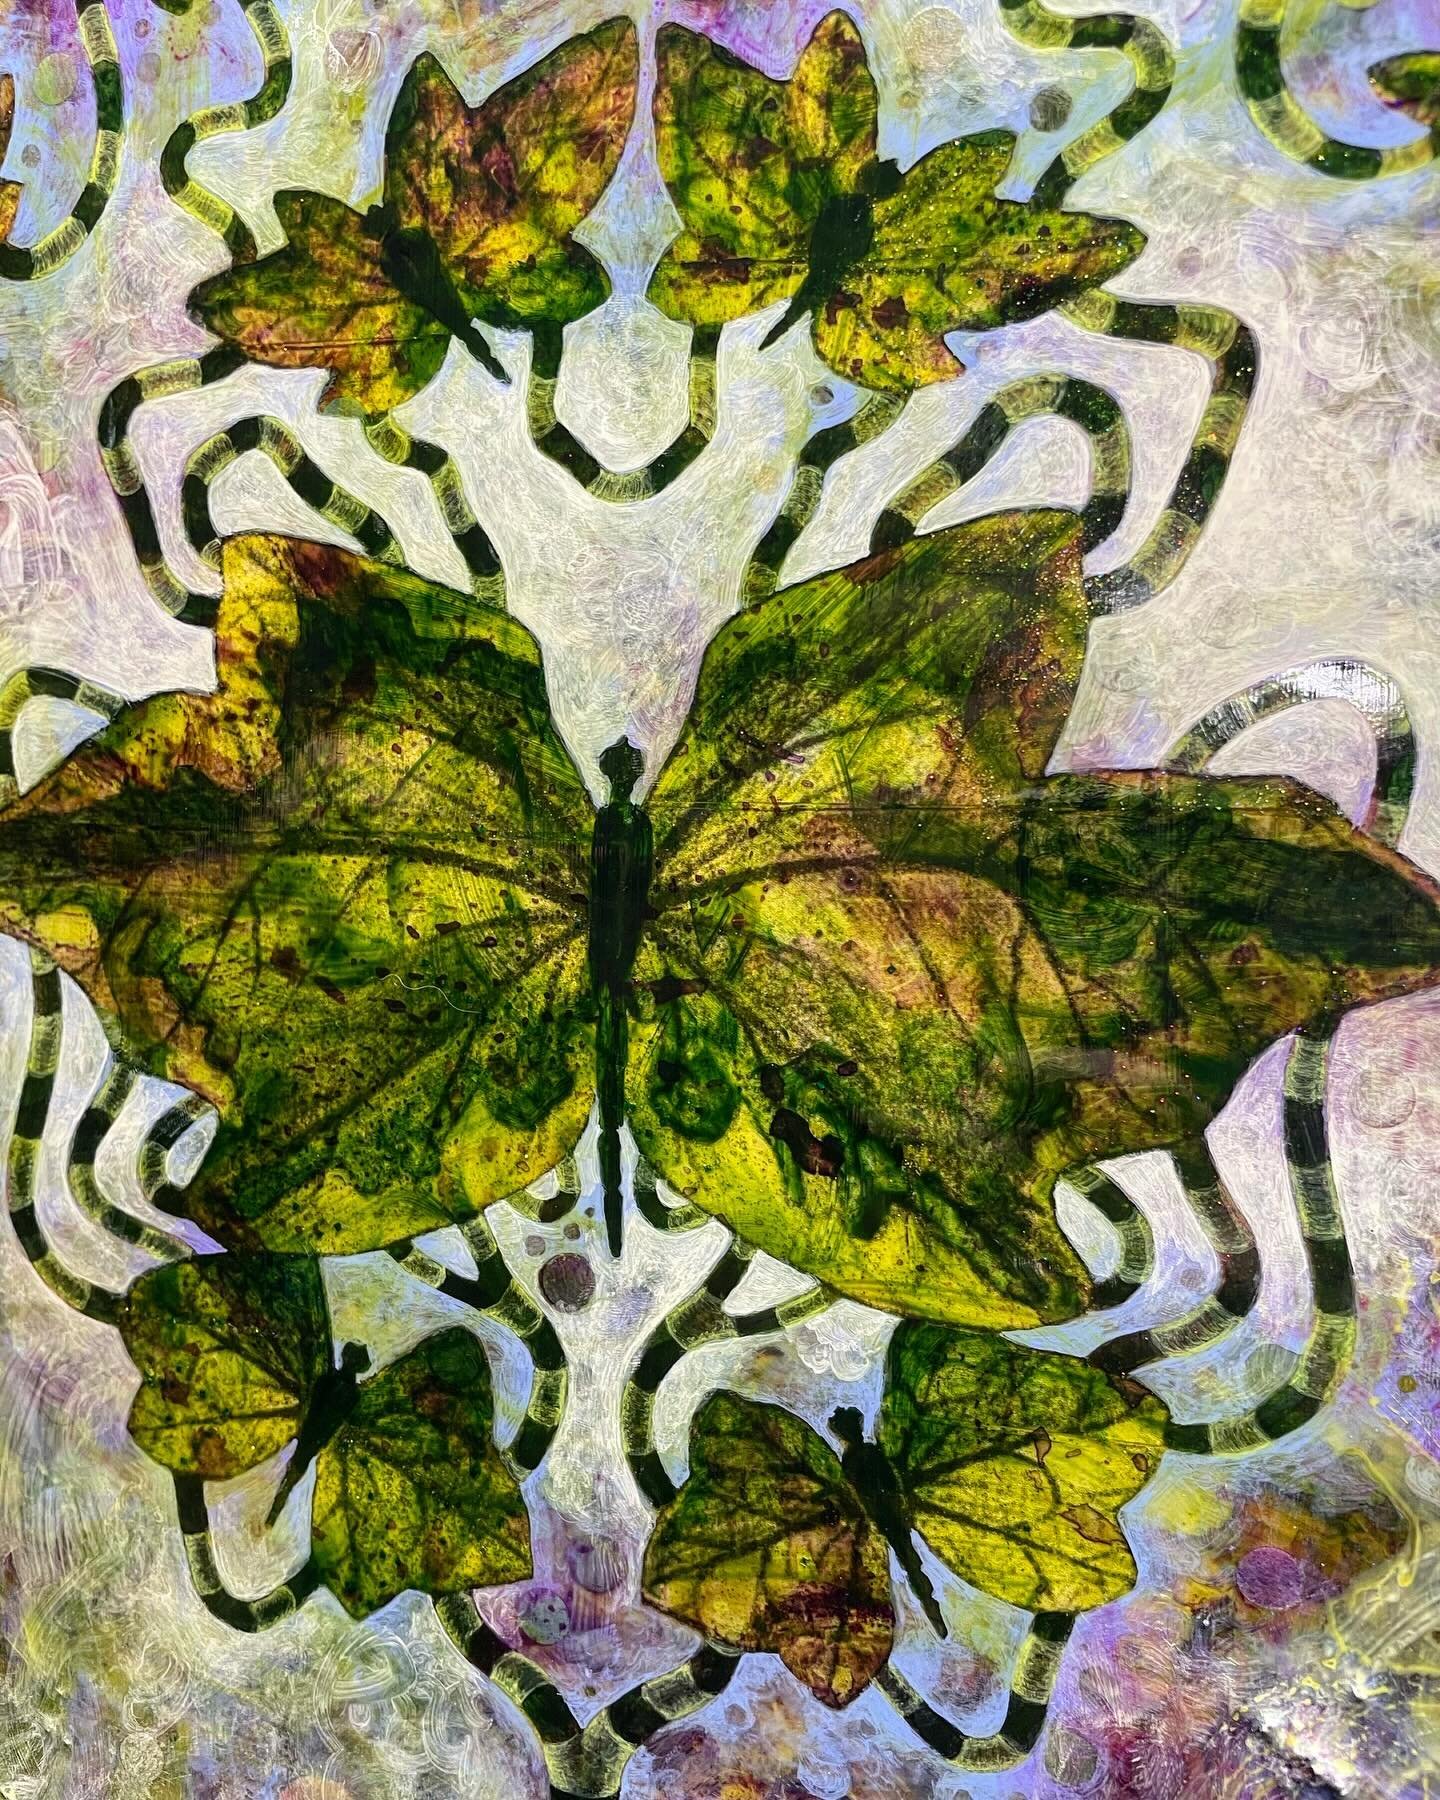 Another background layer to make things start to POP on IVY - THE SURVIVOR
SEPTEMBER 30 - OCTOBER 27

http://www.kollaranderson.com/treezodiac